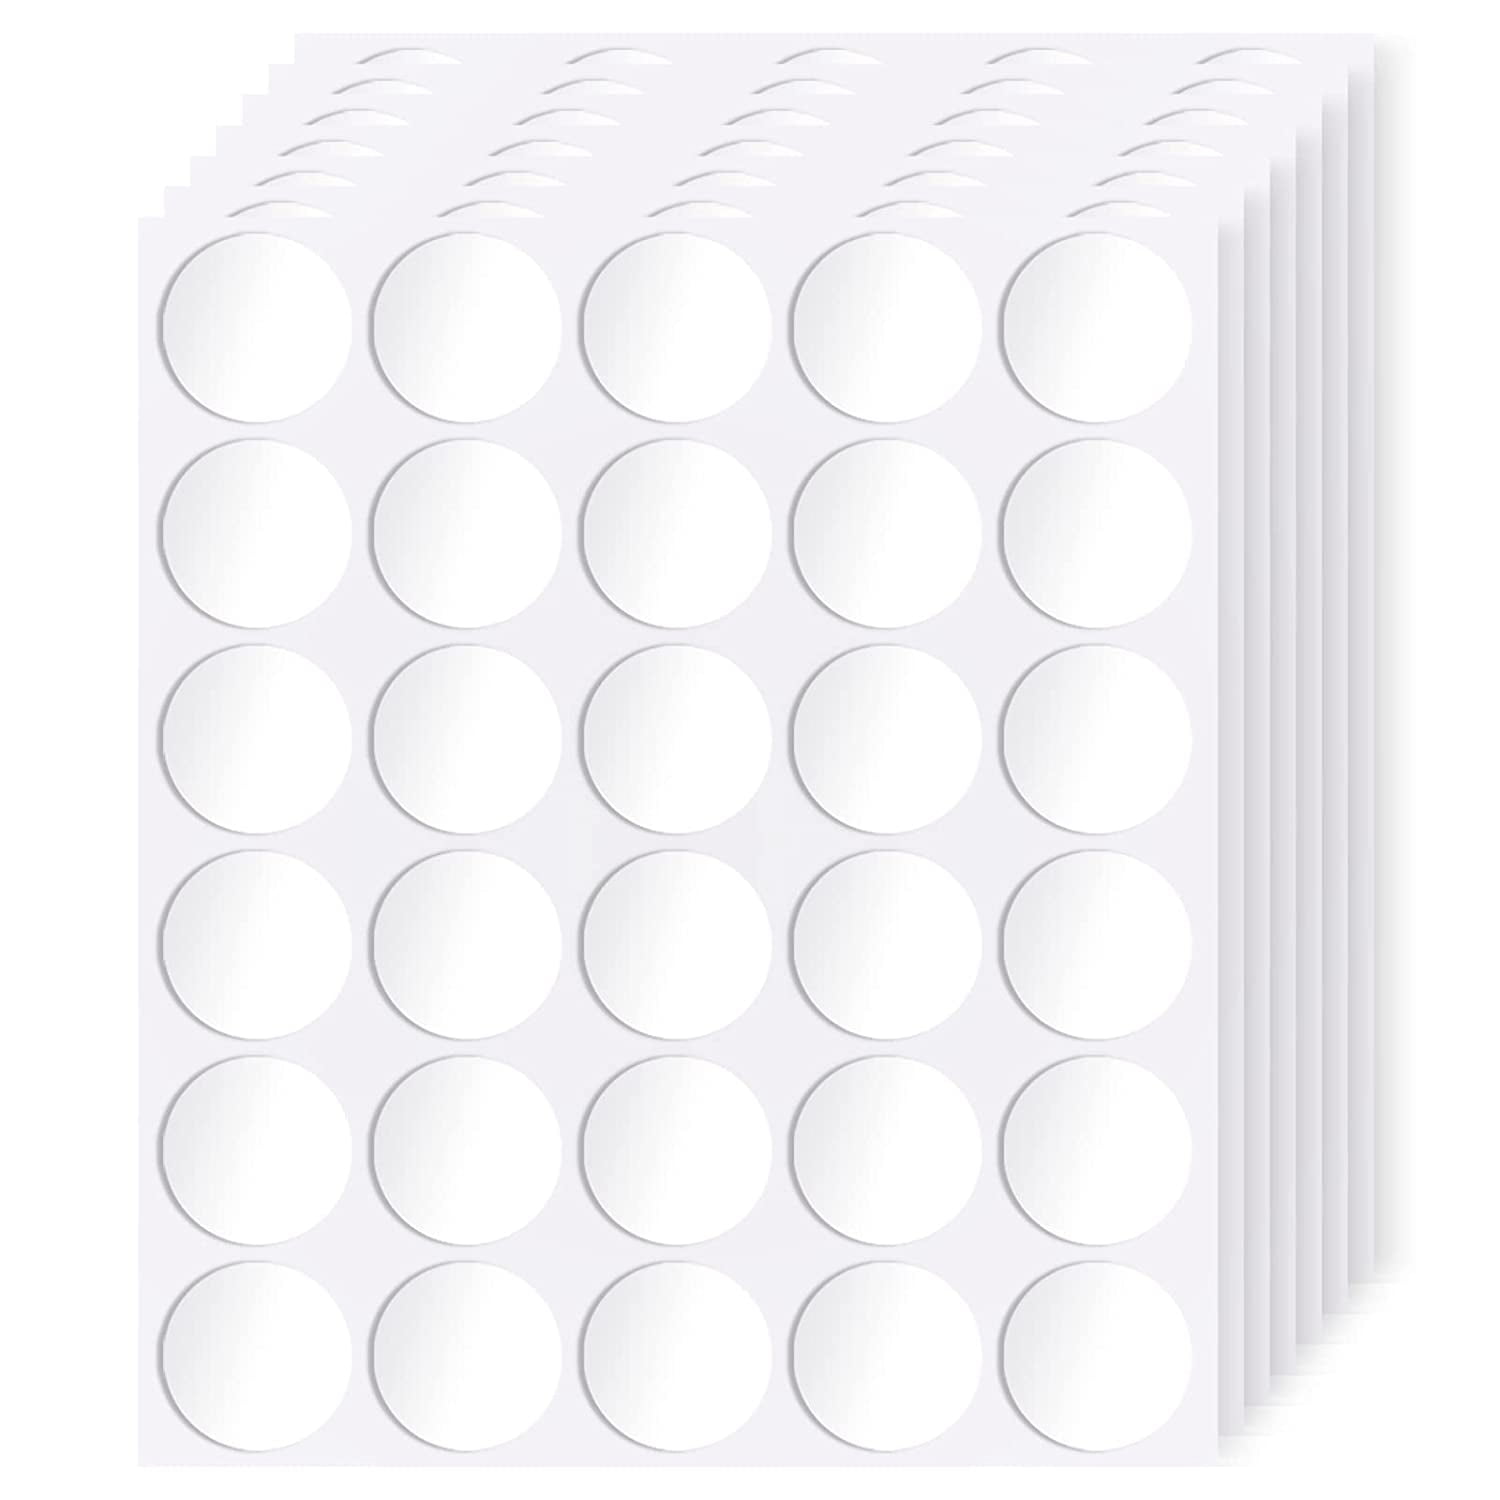  VILLCASE 15 Rolls Double-Sided Dispensing Tape Dot Stickers  Round Balloons Sticky Balloon Poster Stickers Poster Glue Points Removable  White No Trace Soft Acrylic Double Sided Sticker : Arts, Crafts & Sewing